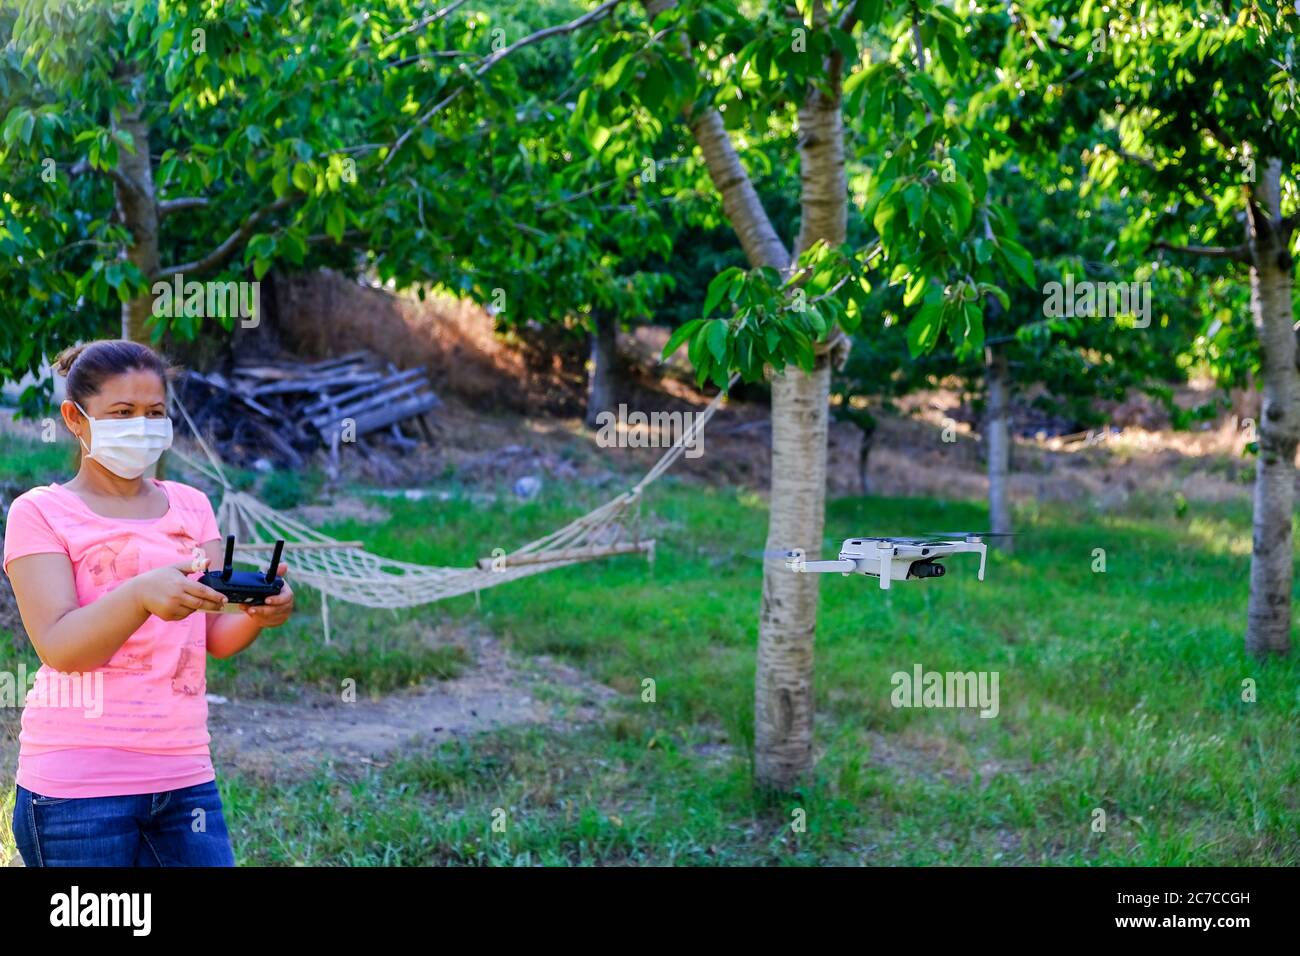 Woman flying drone in nature in new normal life. Woman having fun in the park with mask due to corona virus. Stock Photo